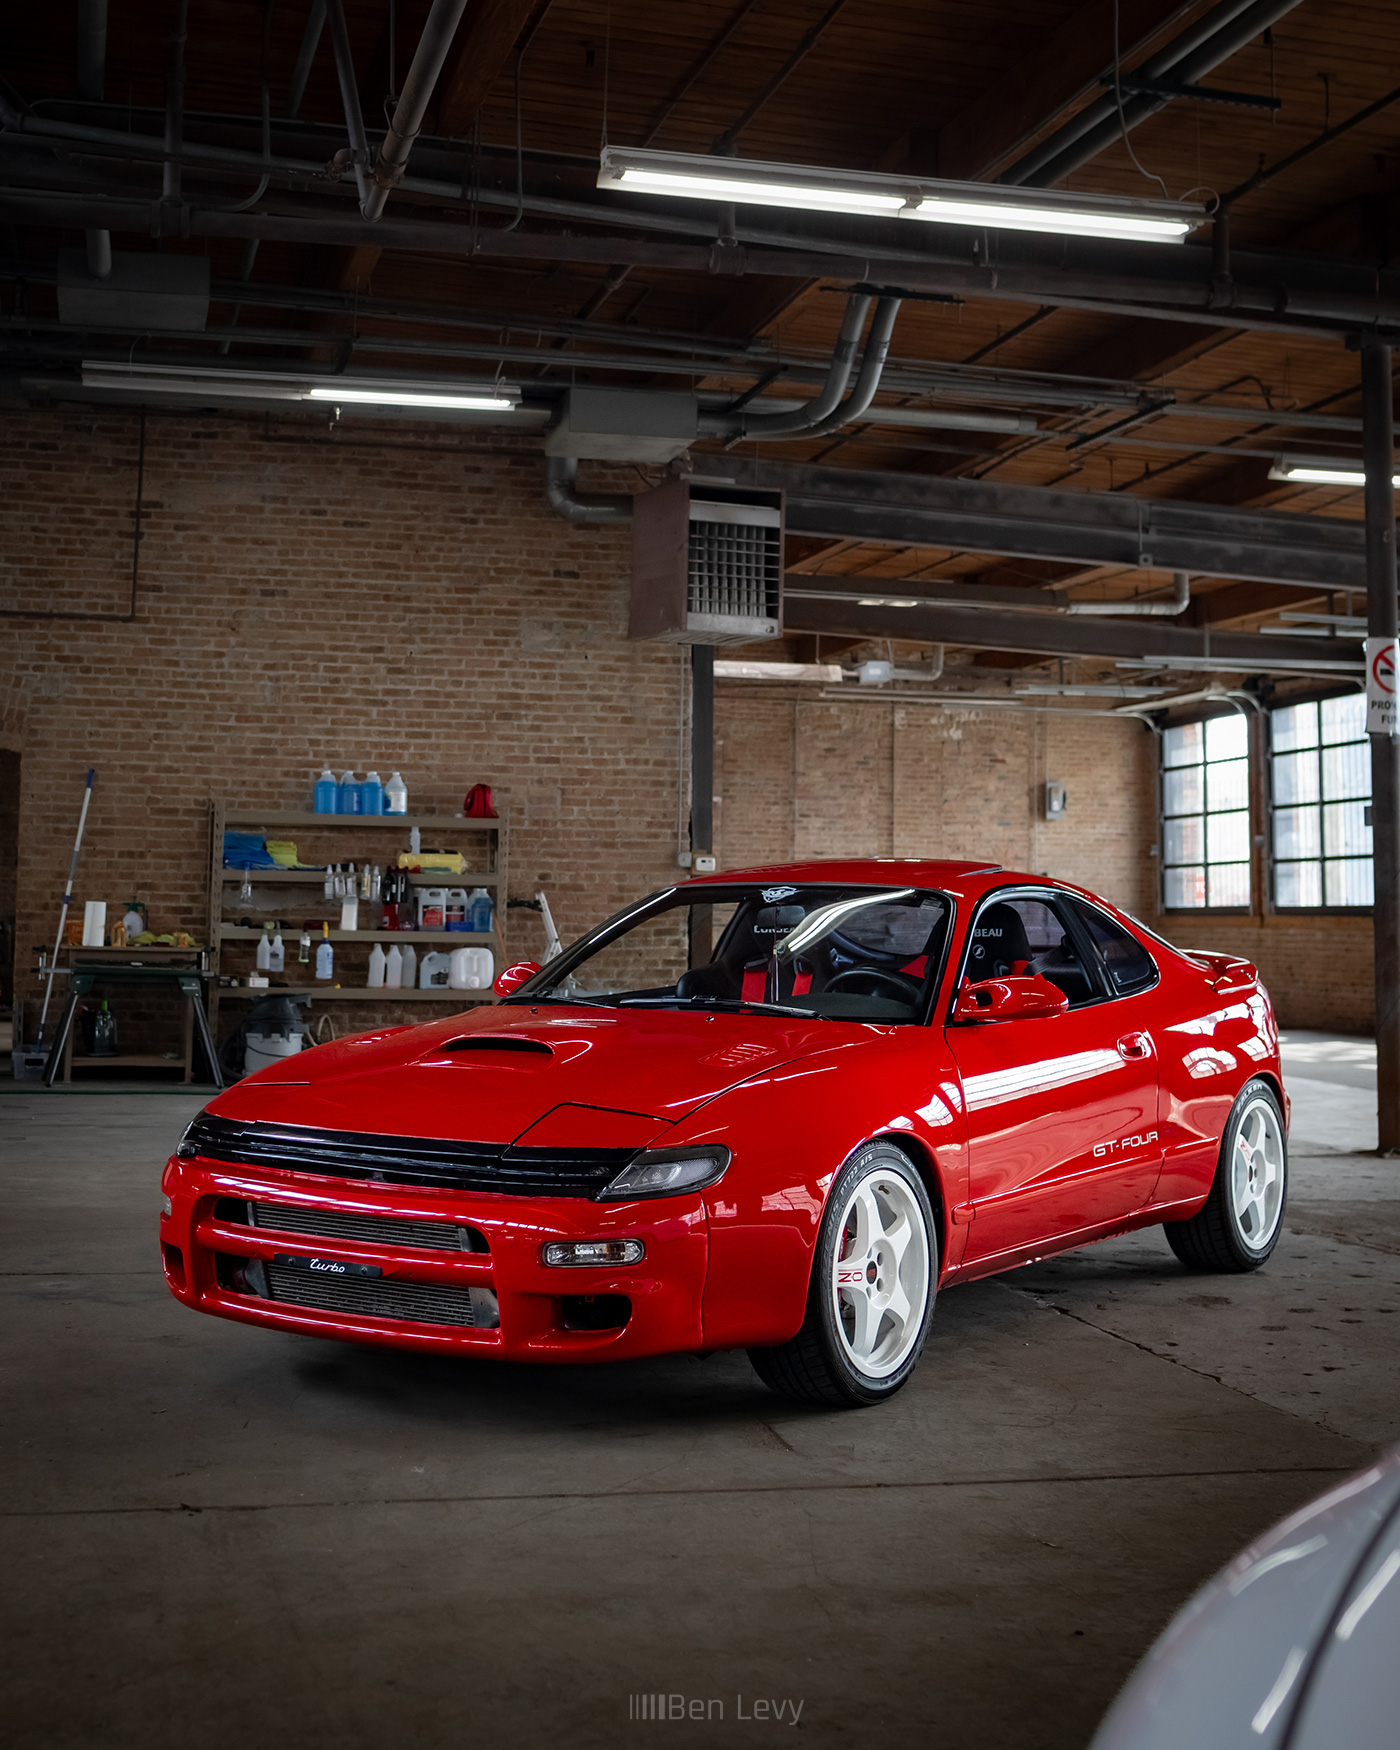 Turbo AWD Toyota Celica in Red